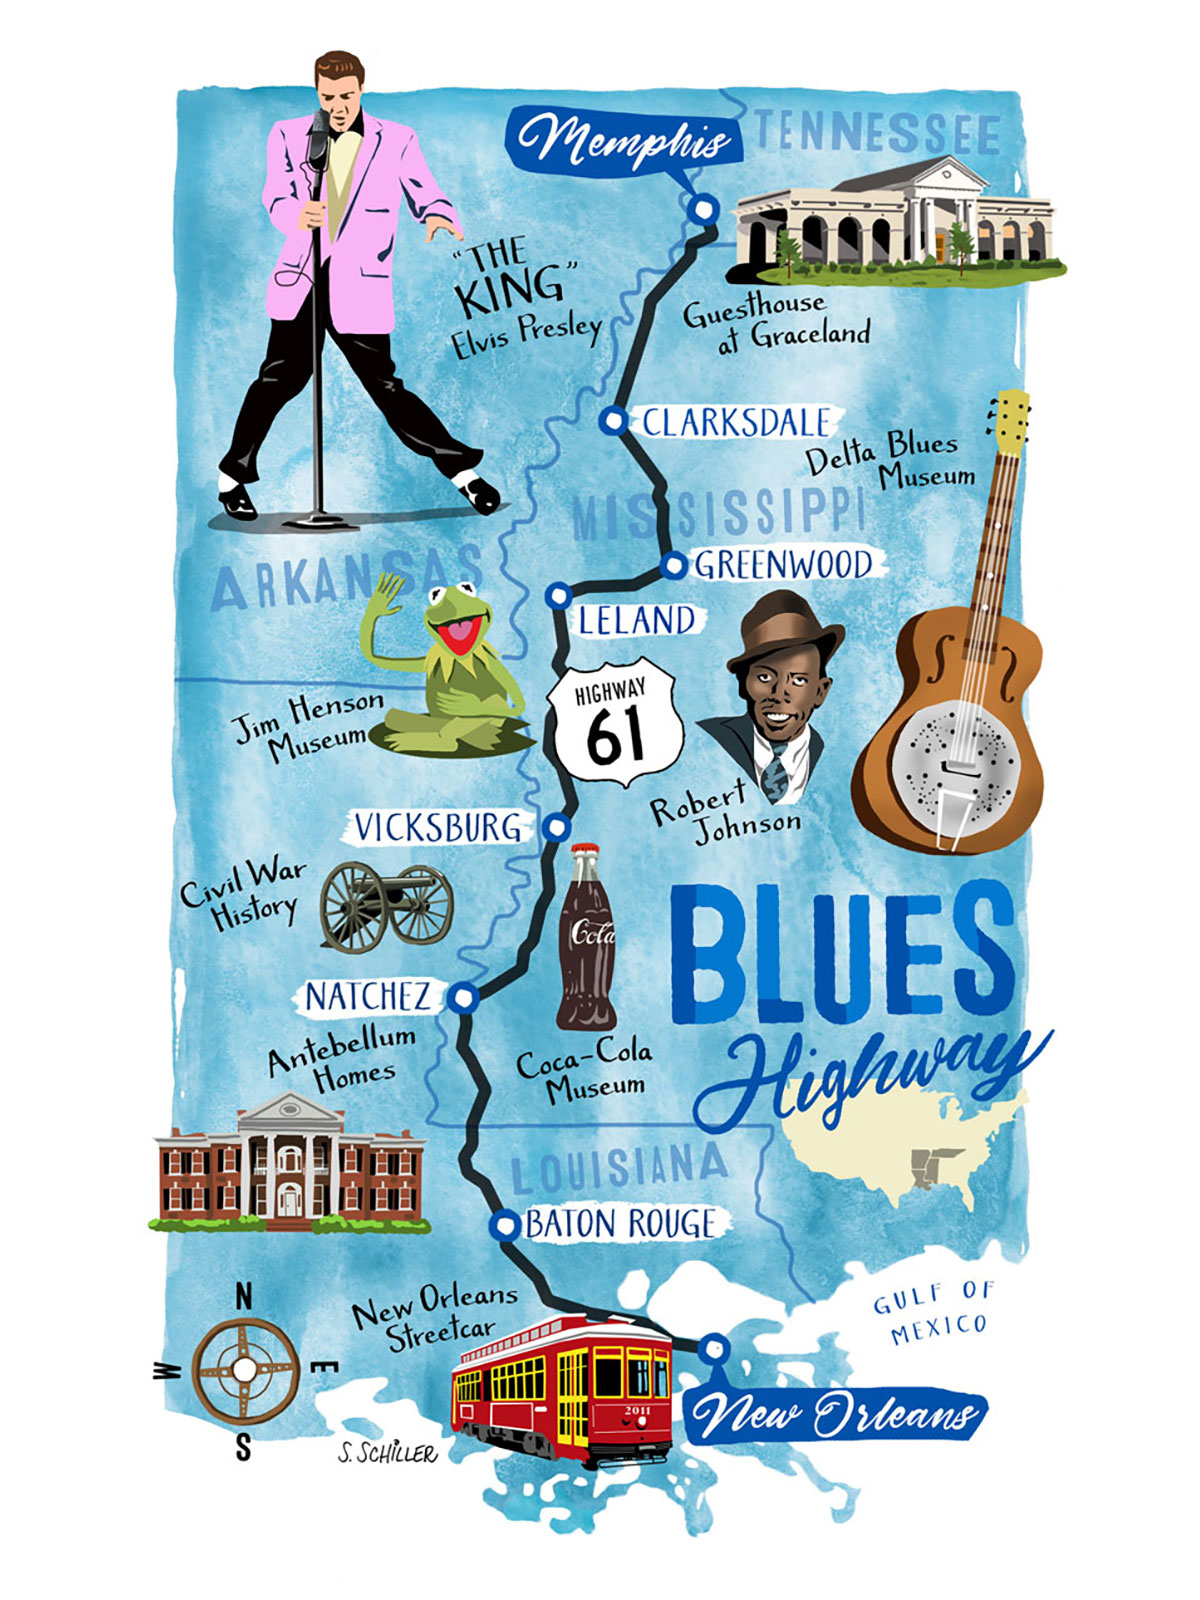 the blues highway